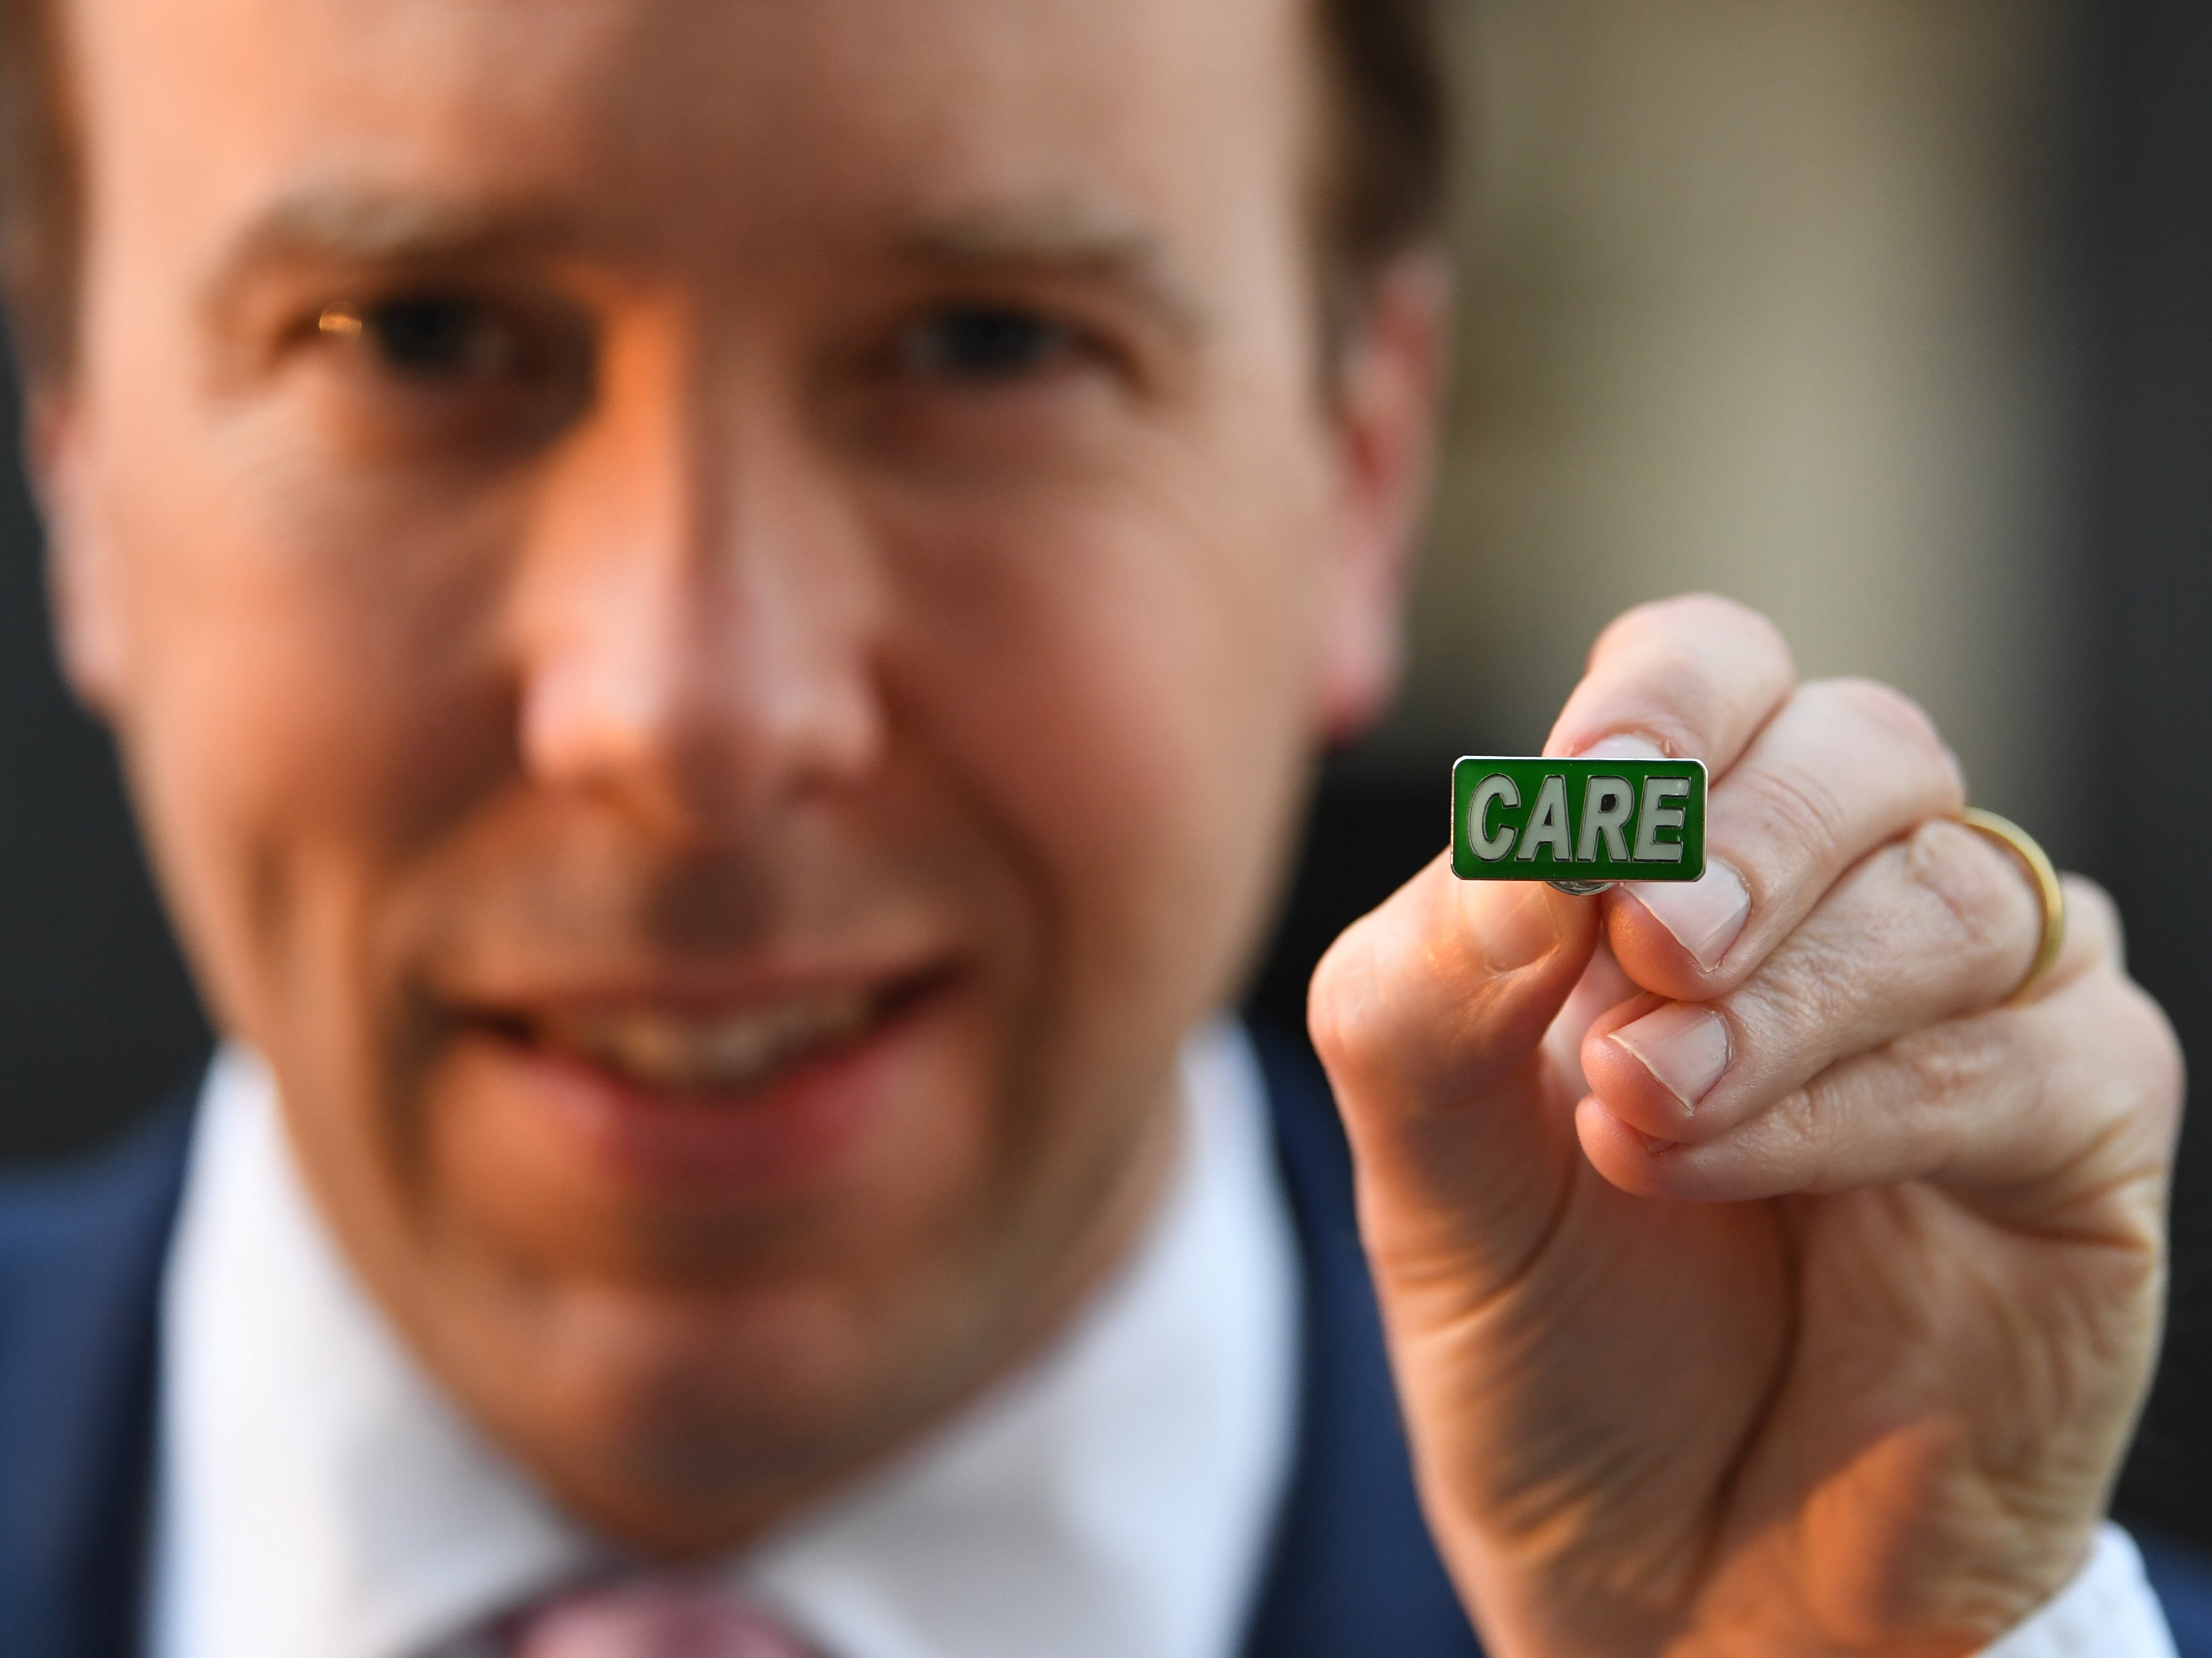 Matt Hancock displays an NHS-style ‘Care’ badge in April 2020. Ministers have still not delivered the reform plan Boris Johnson said was ‘prepared’ in 2019